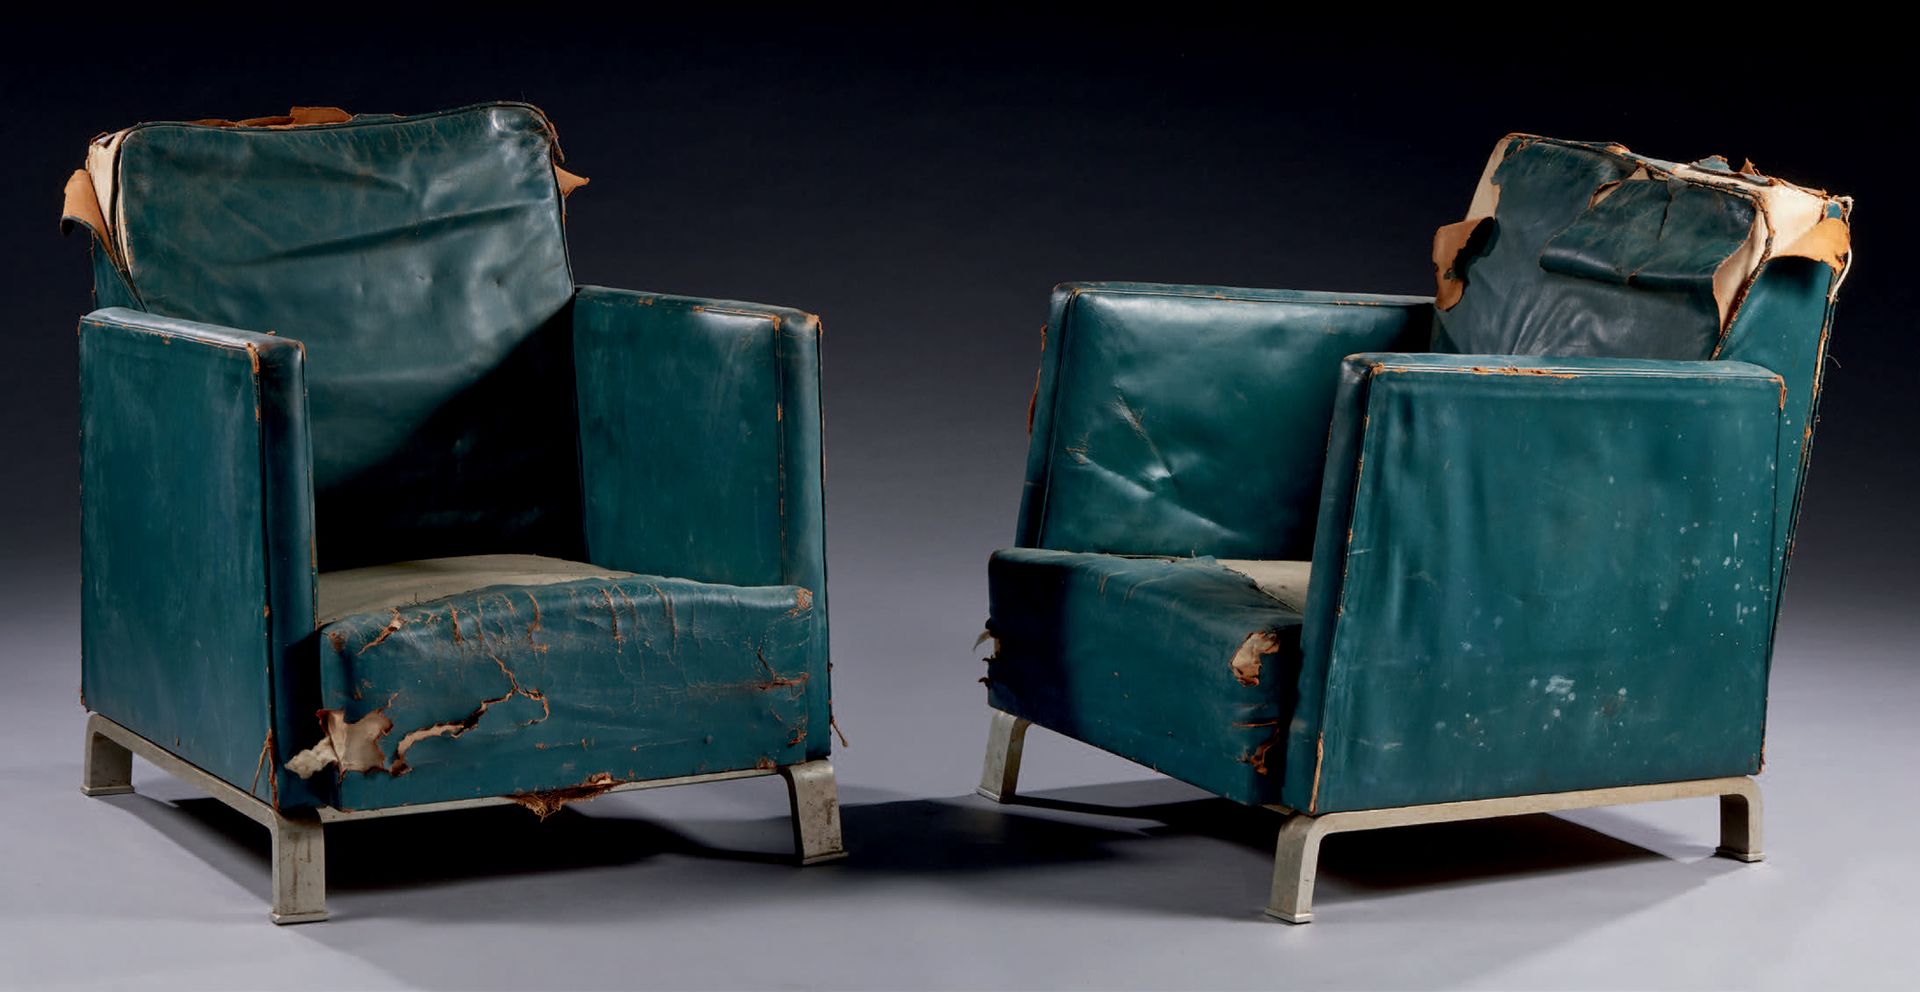 TRAVAIL MODERNISTE Pair of armchairs, wooden structure, chromed metal legs, gree&hellip;